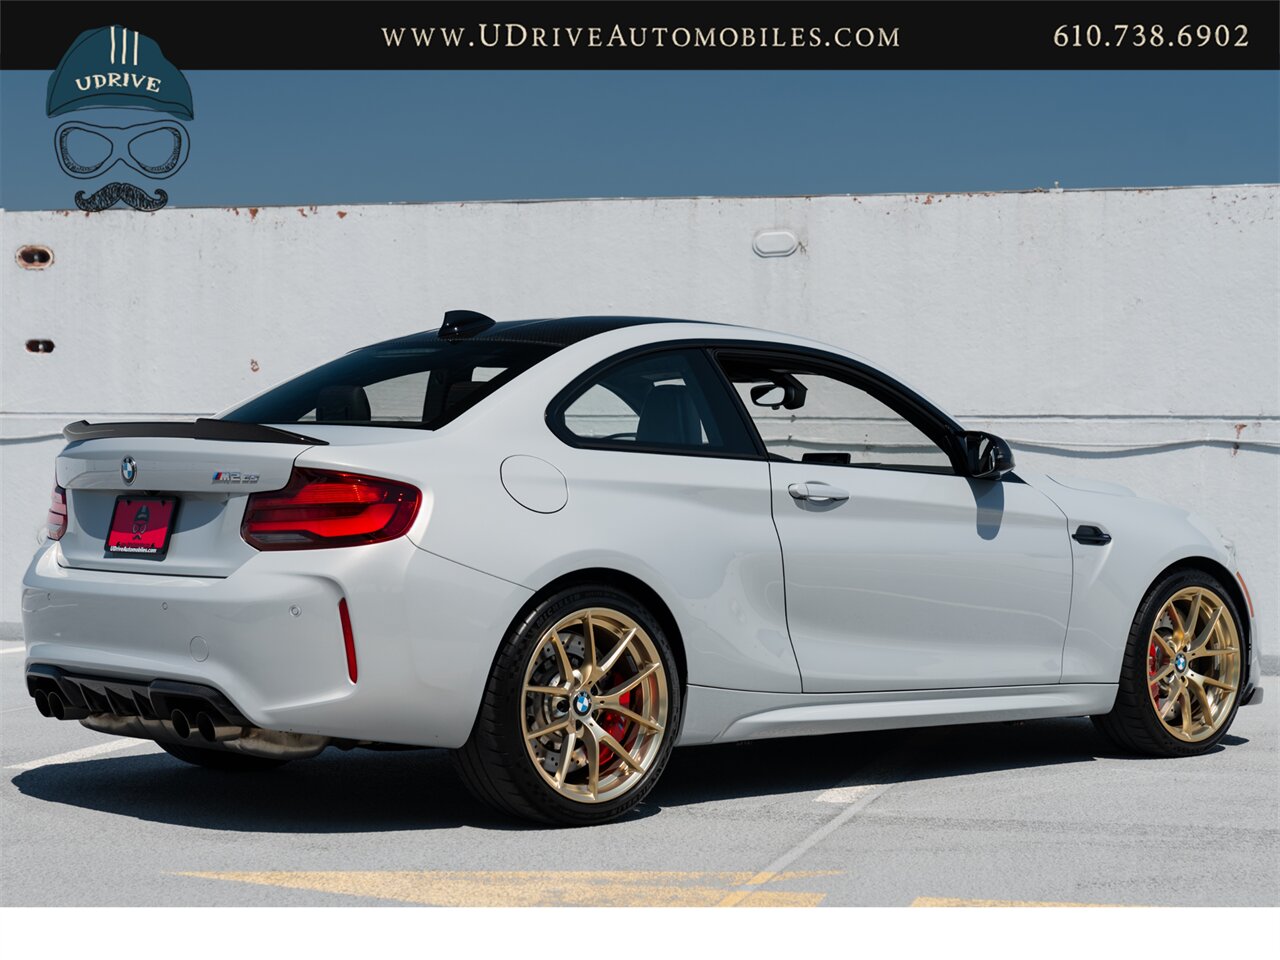 2020 BMW M2 CS  M2 CS 6 Speed Manual 2k Miles Full Body PPF Factory Warranty until 2025 - Photo 19 - West Chester, PA 19382